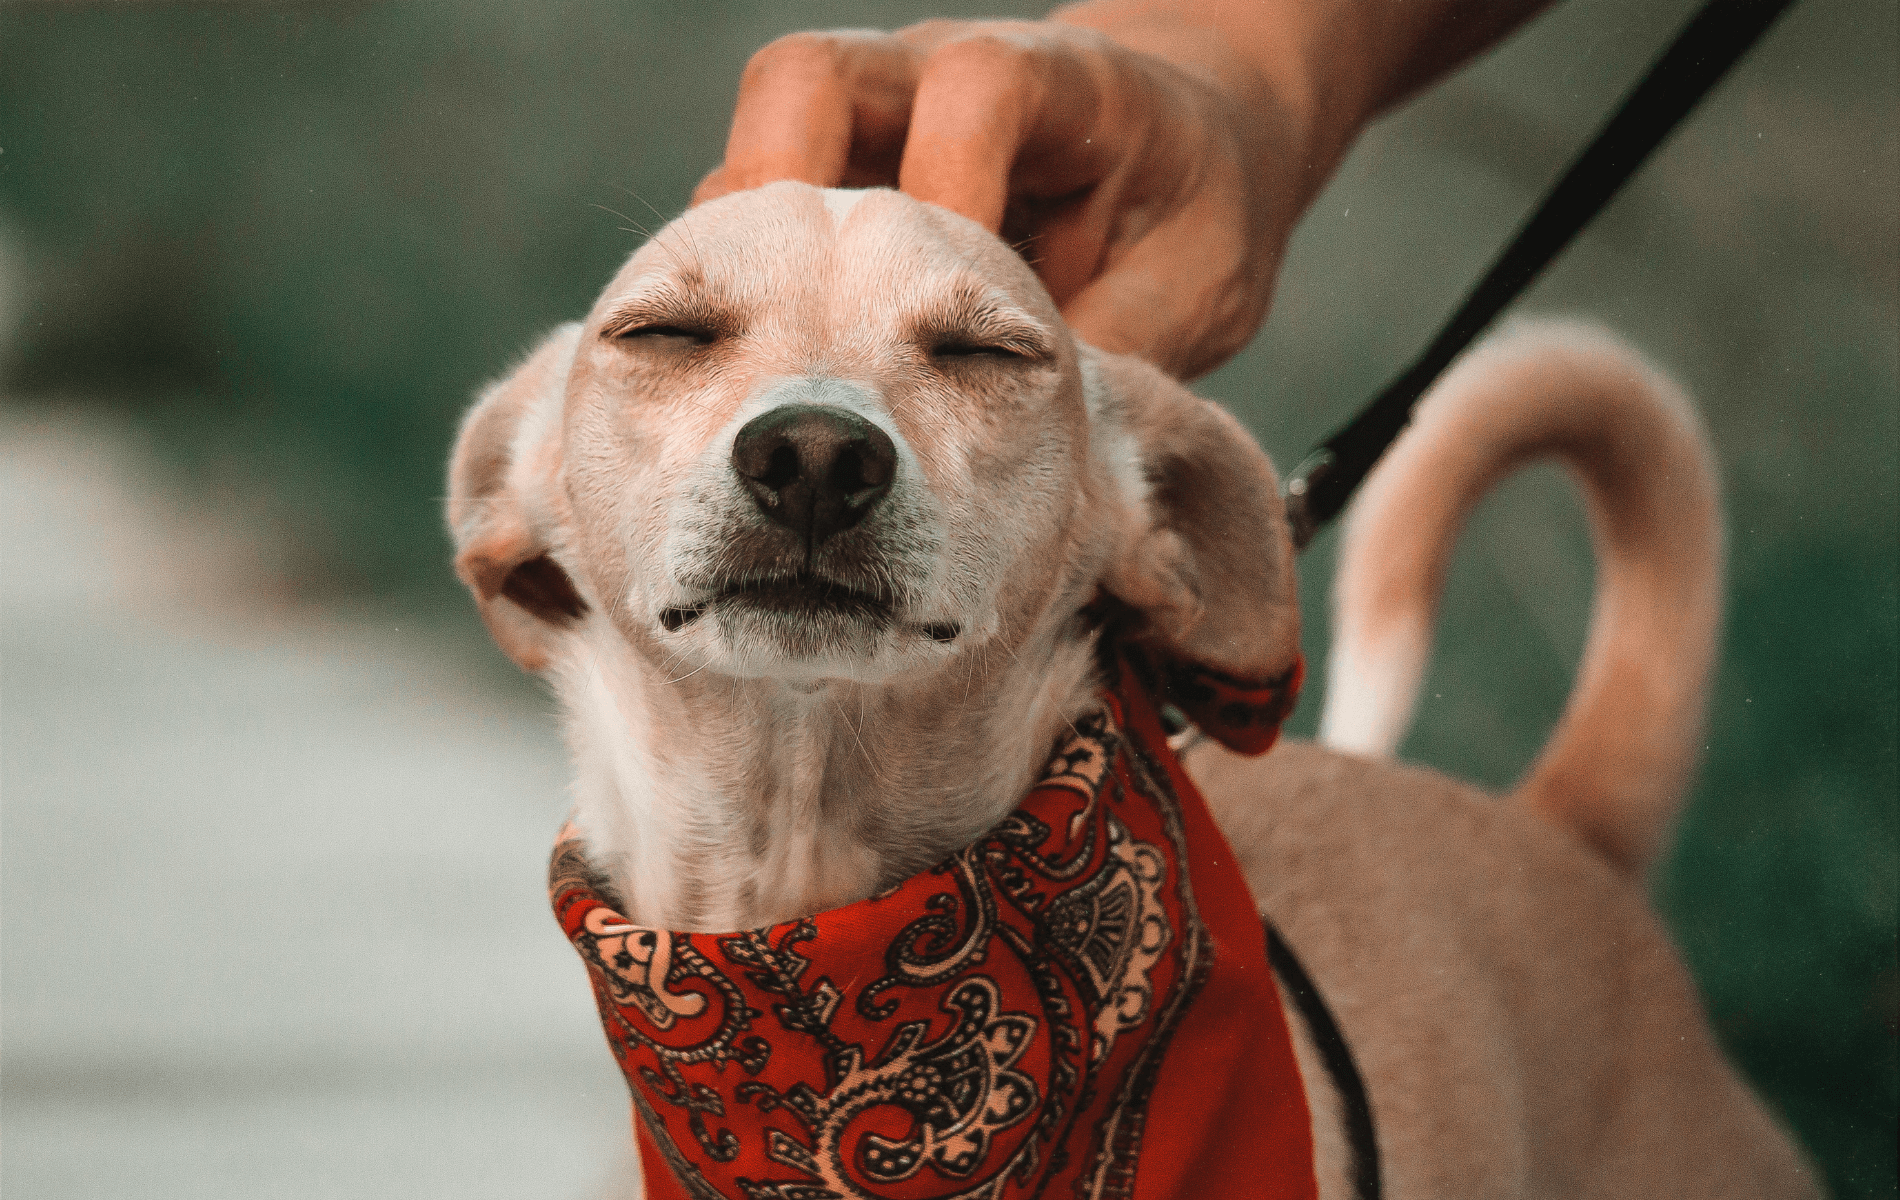 A dog with its eyes closed